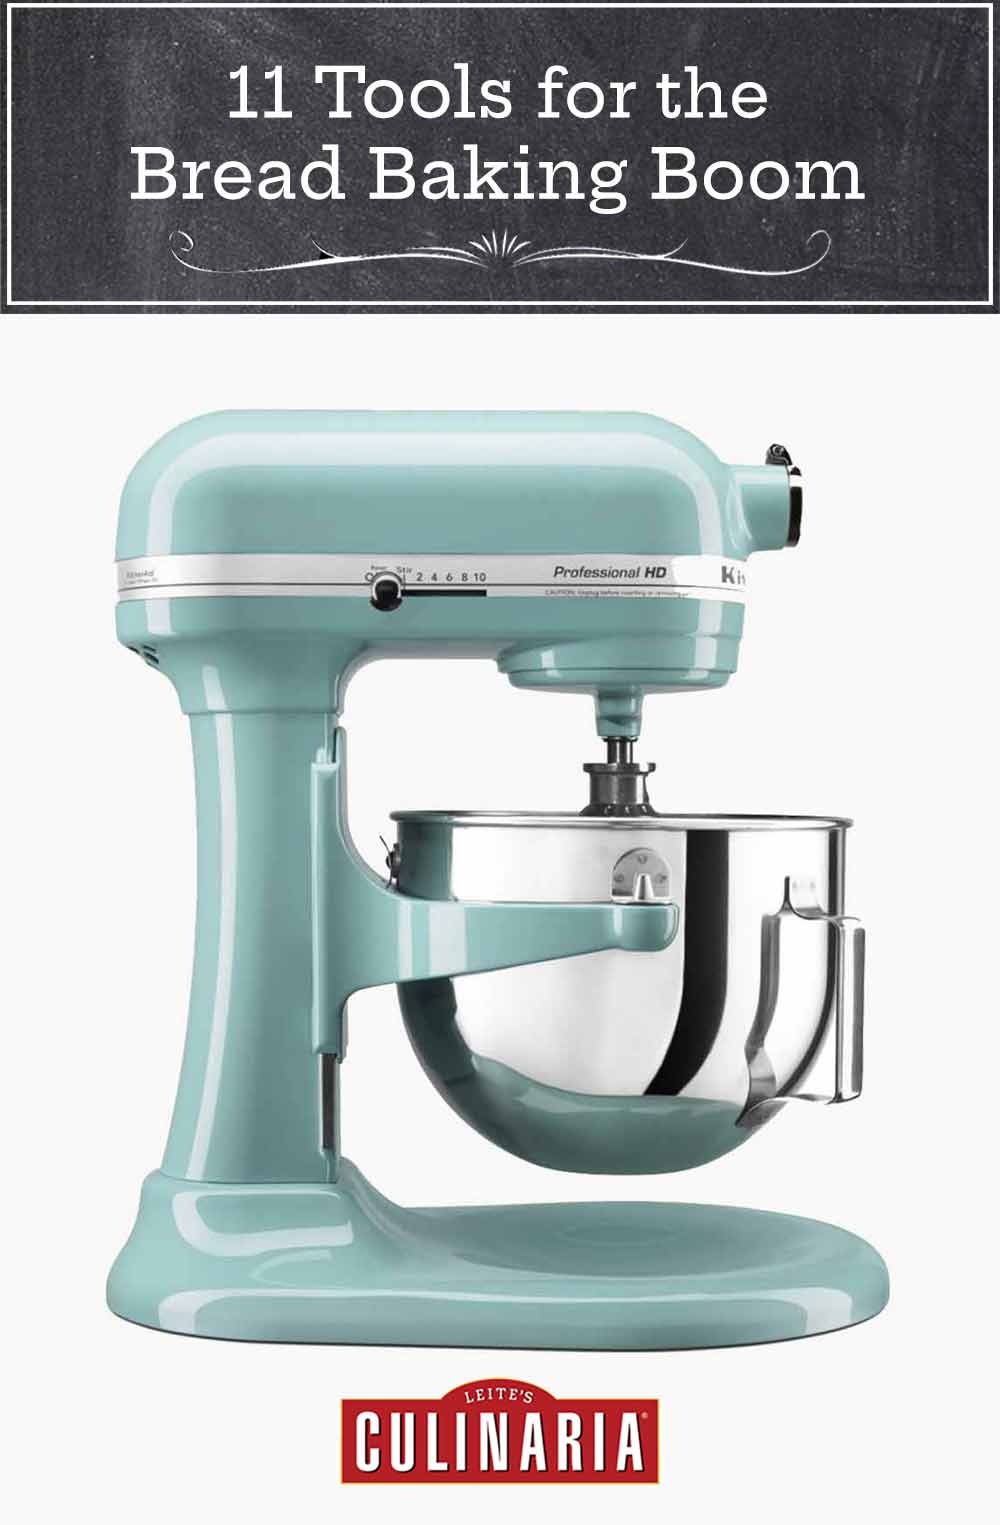 A stand mixer as one of the 11 tools for the bread baking boom.